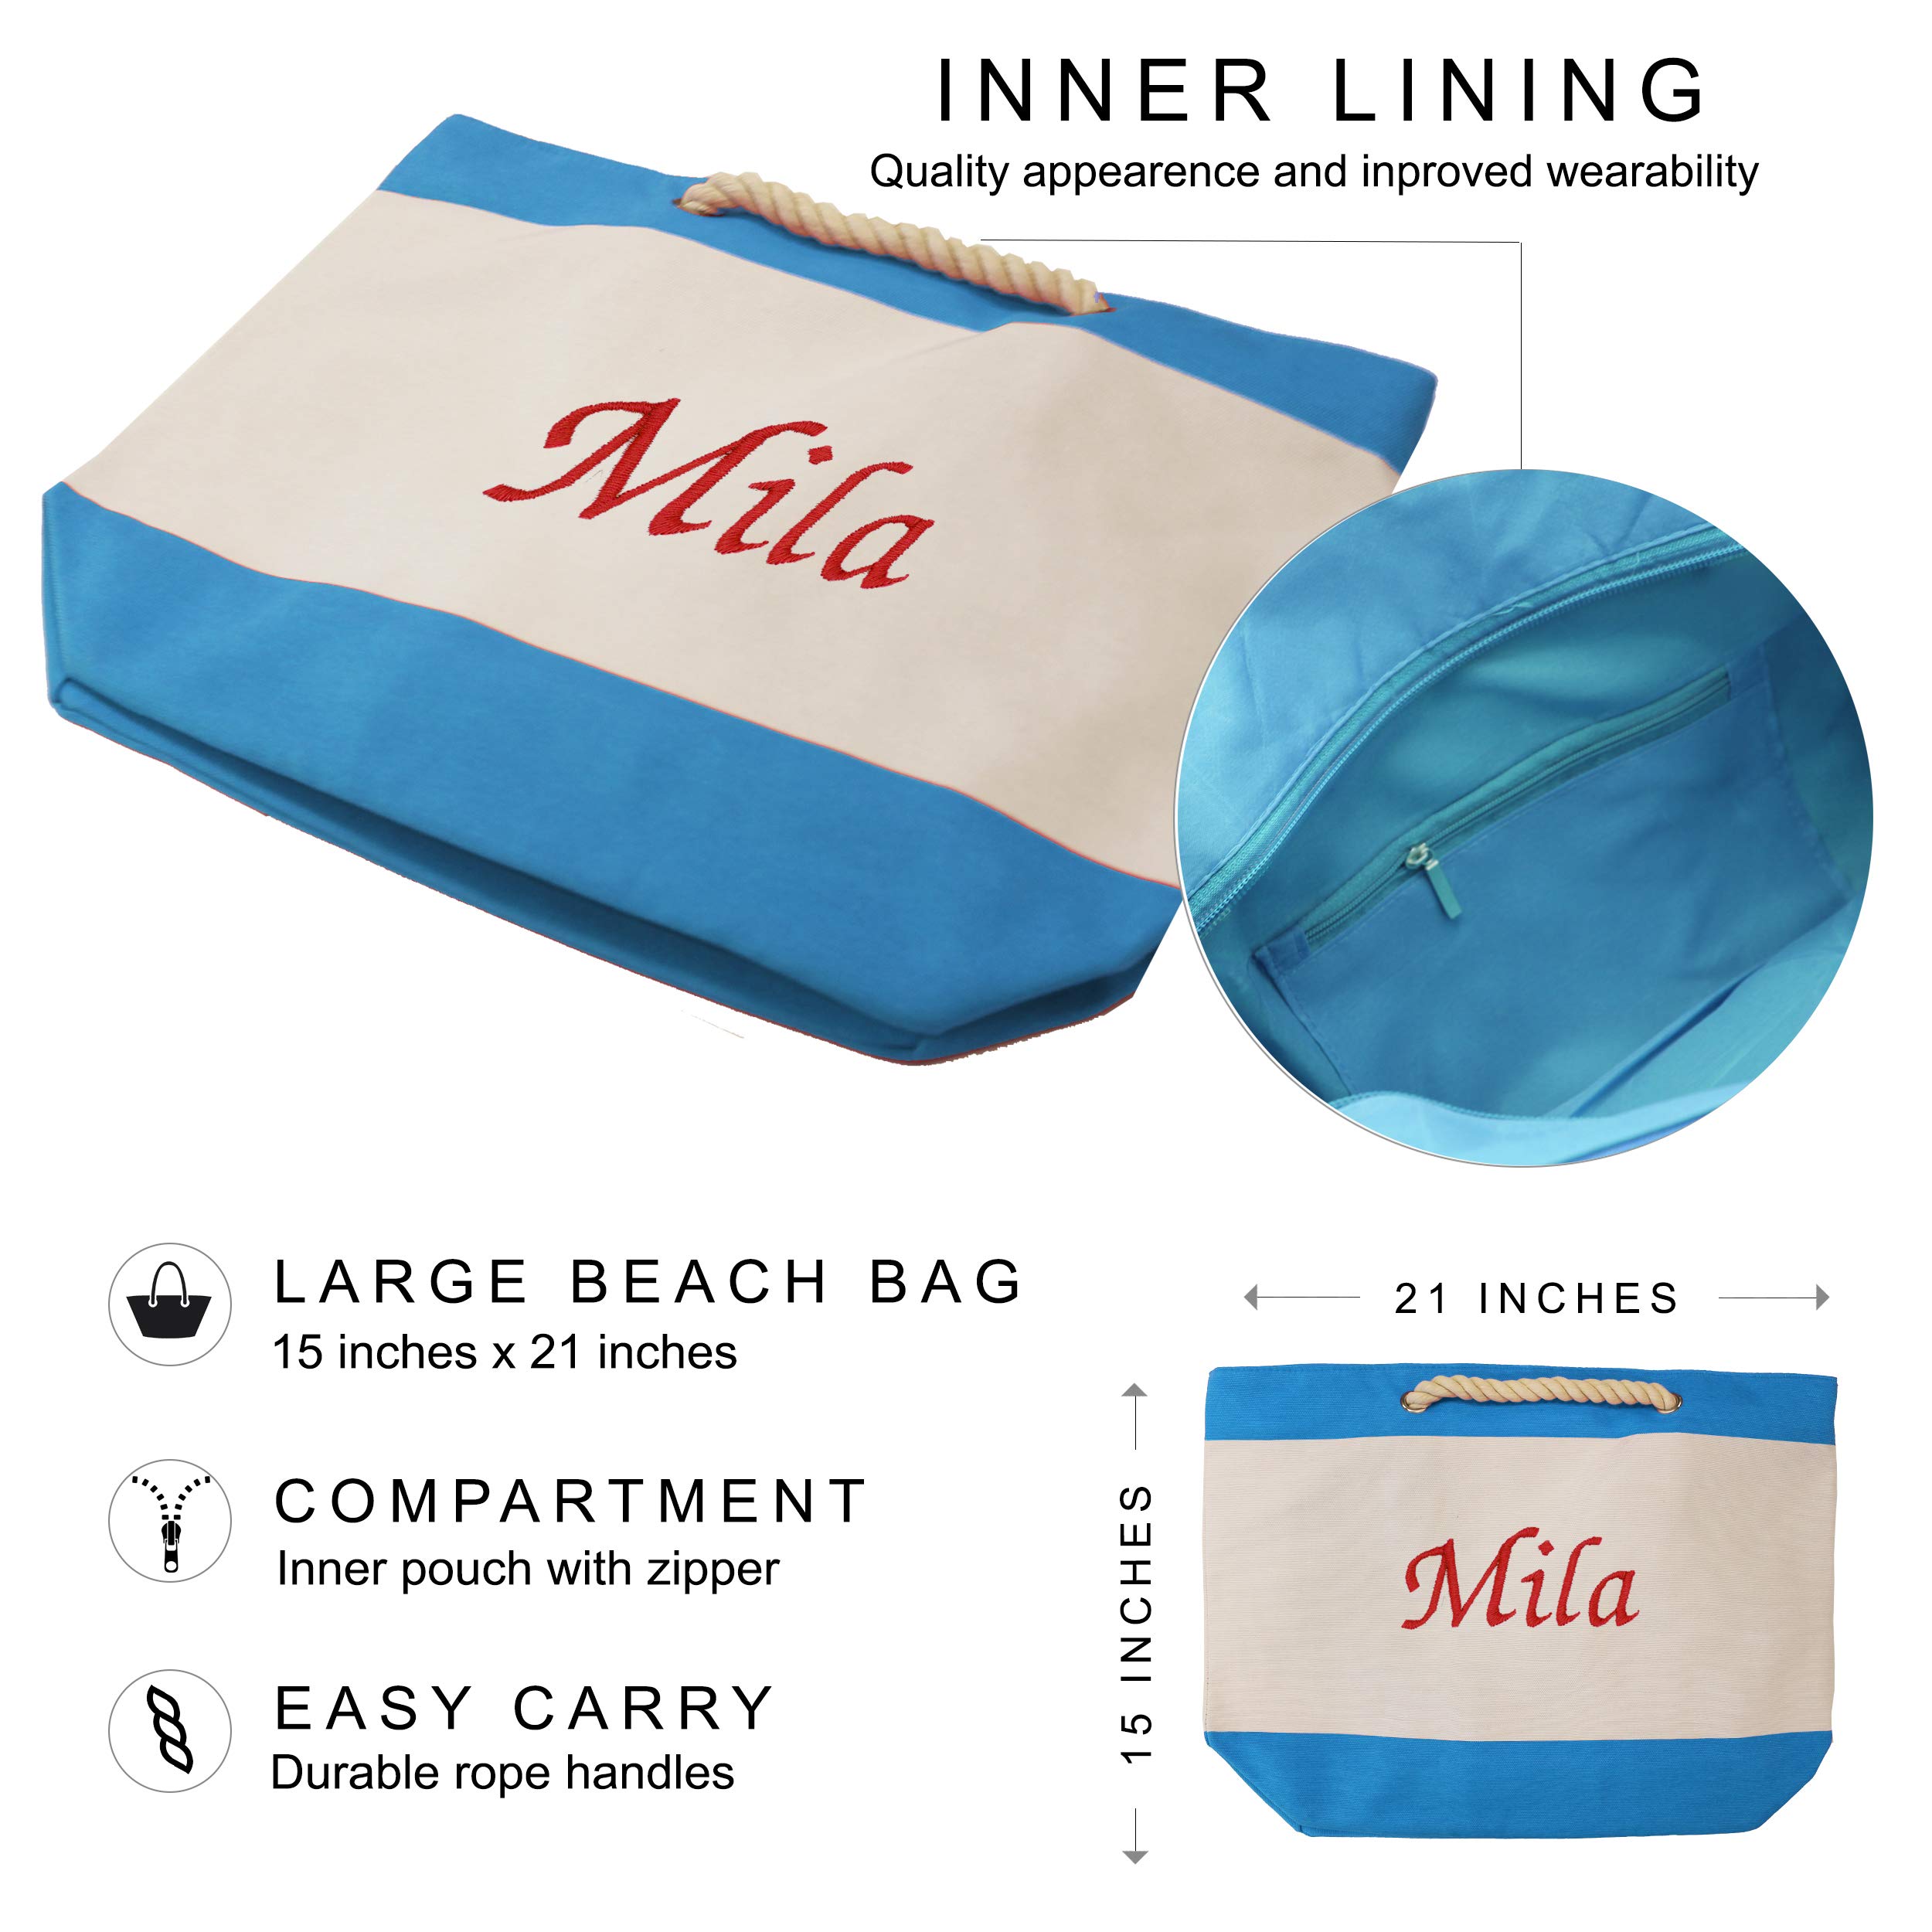 The Wedding Party Store Monogrammed Beach Tote Bag with Zipper, Pockets, Name or Initial - Custom Personalized (Royal Blue)